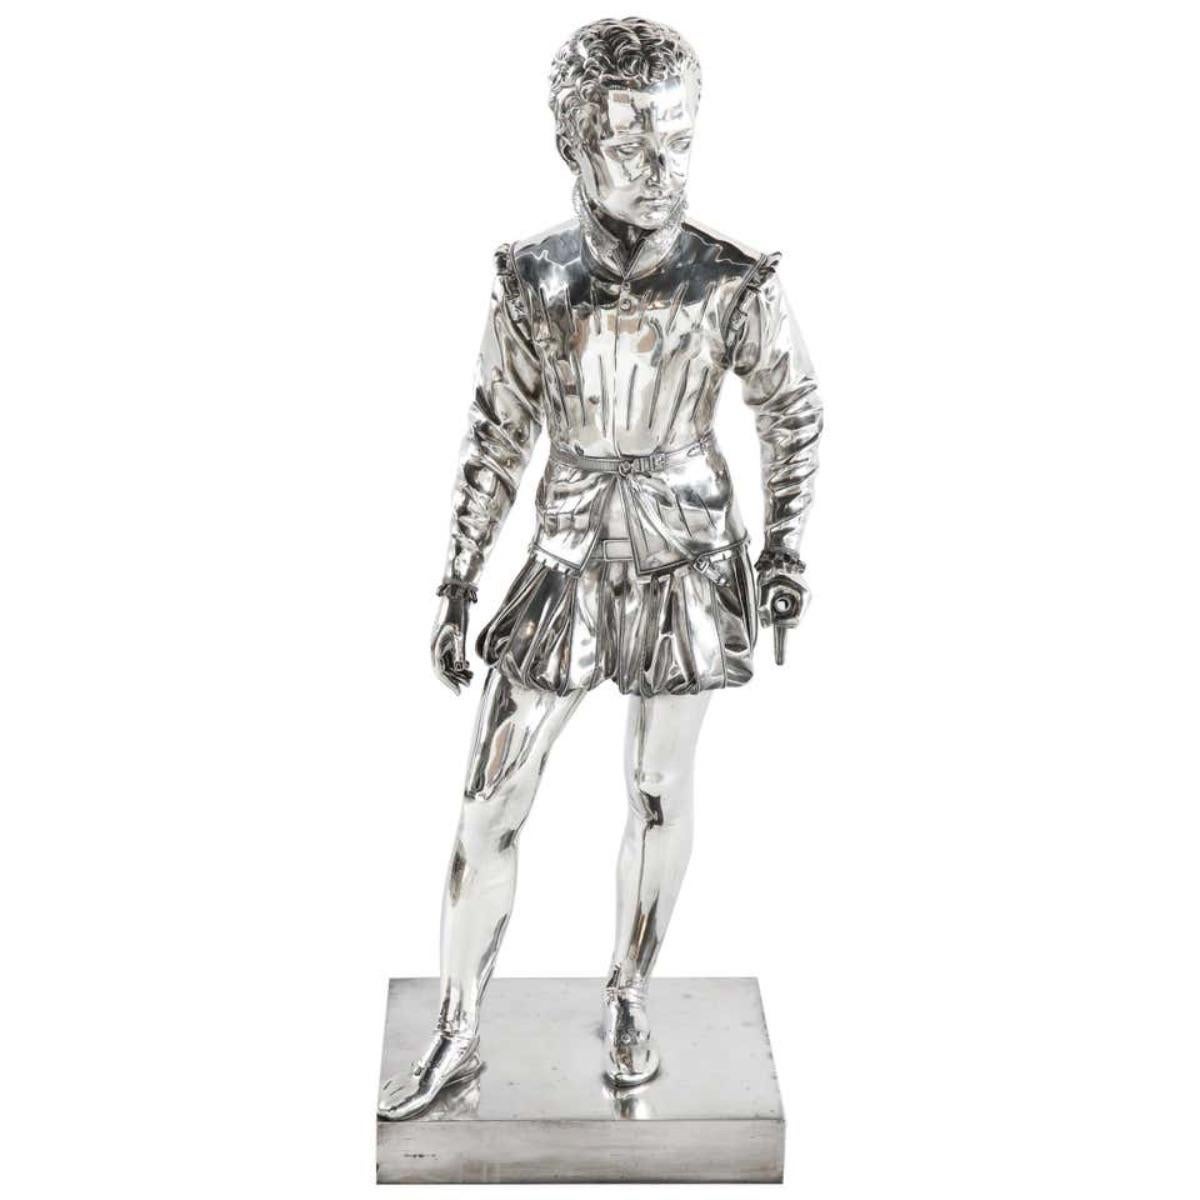 Ferdinand Barbedienne  Figurative Sculpture - F. Barbedienne, a Life-Size Silvered Bronze of King Henri IV Enfant as a Child